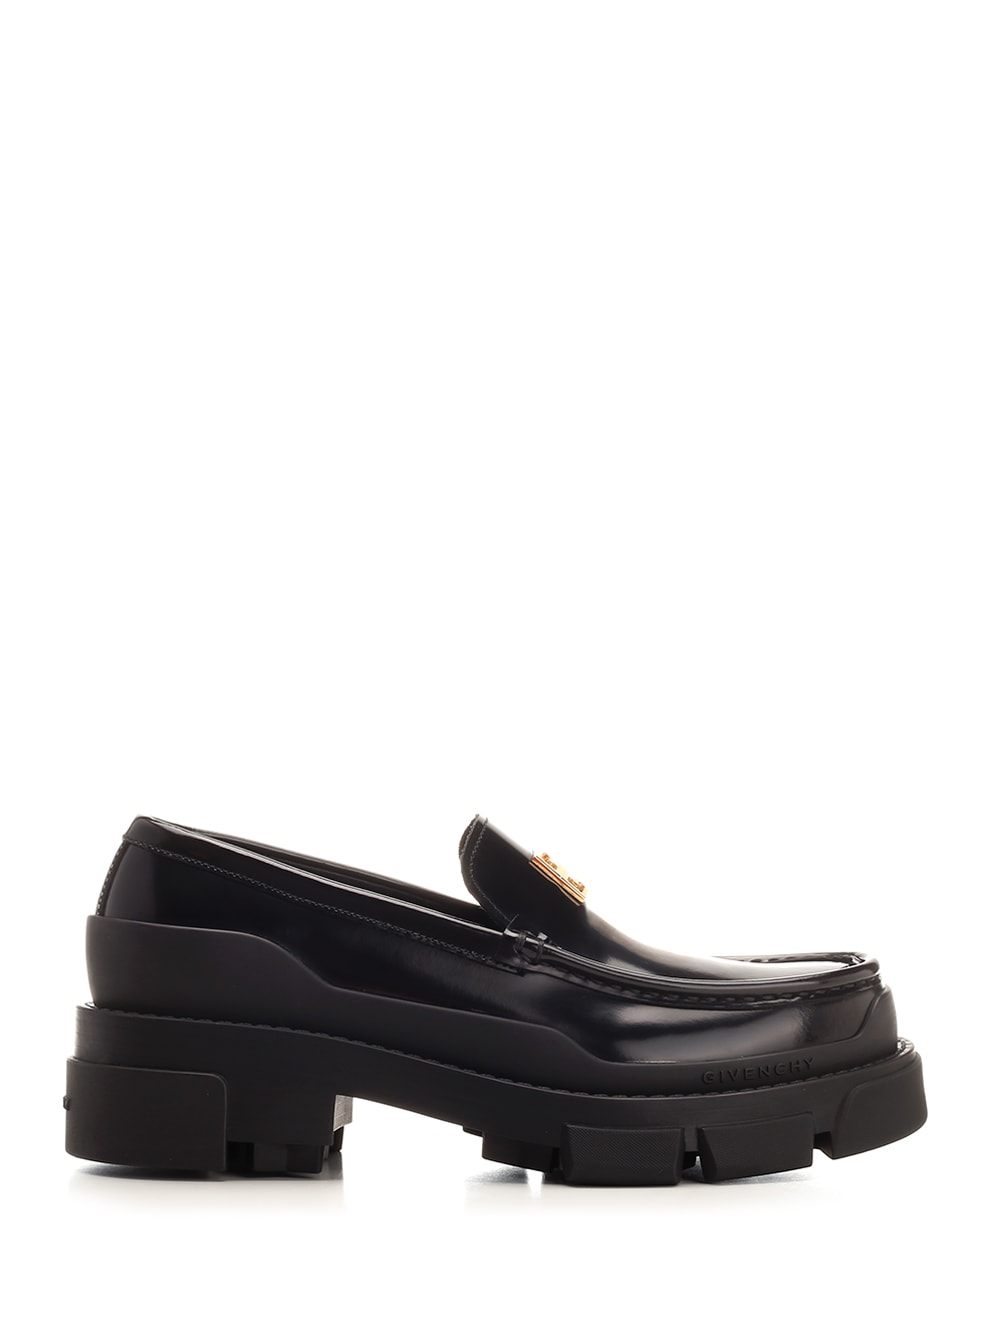 GIVENCHY TERRA BLACK LOAFERS